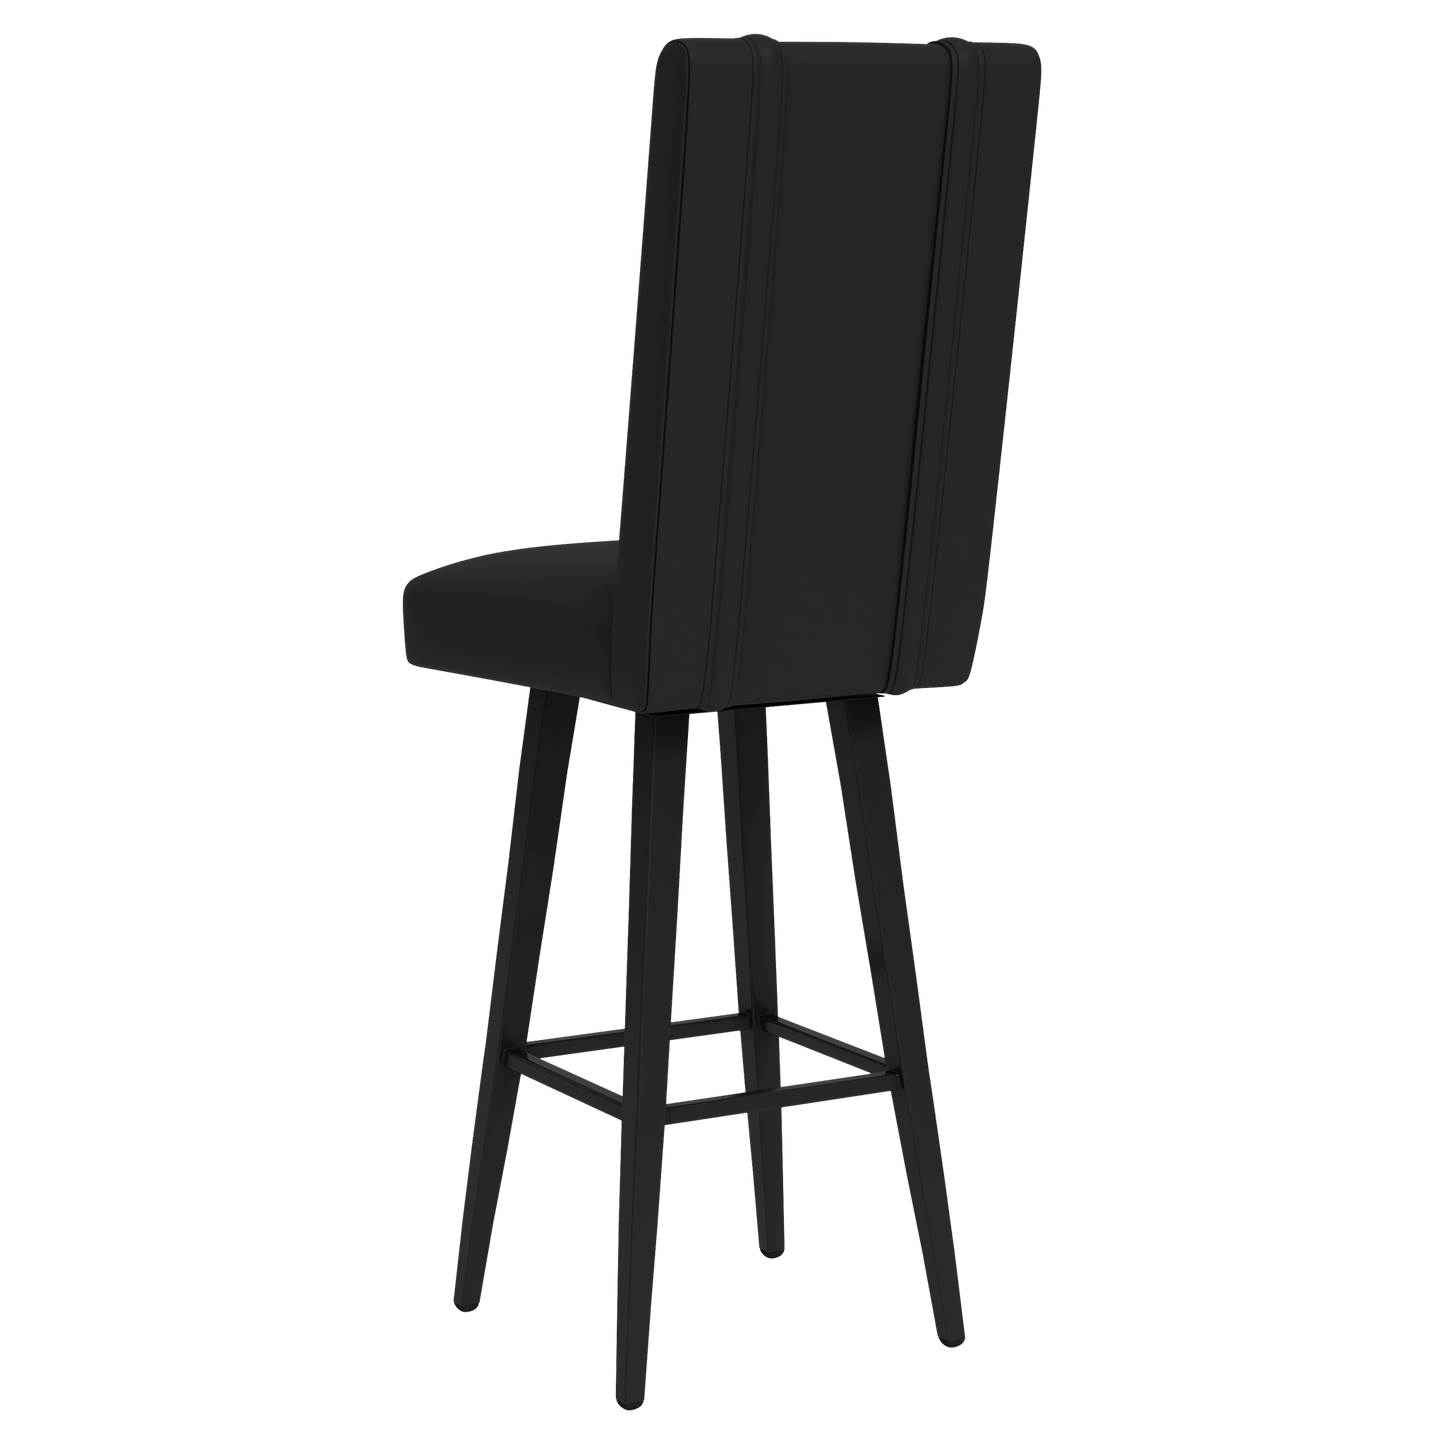 Swivel Bar Stool 2000 with Memphis Grizzlies Primary Logo